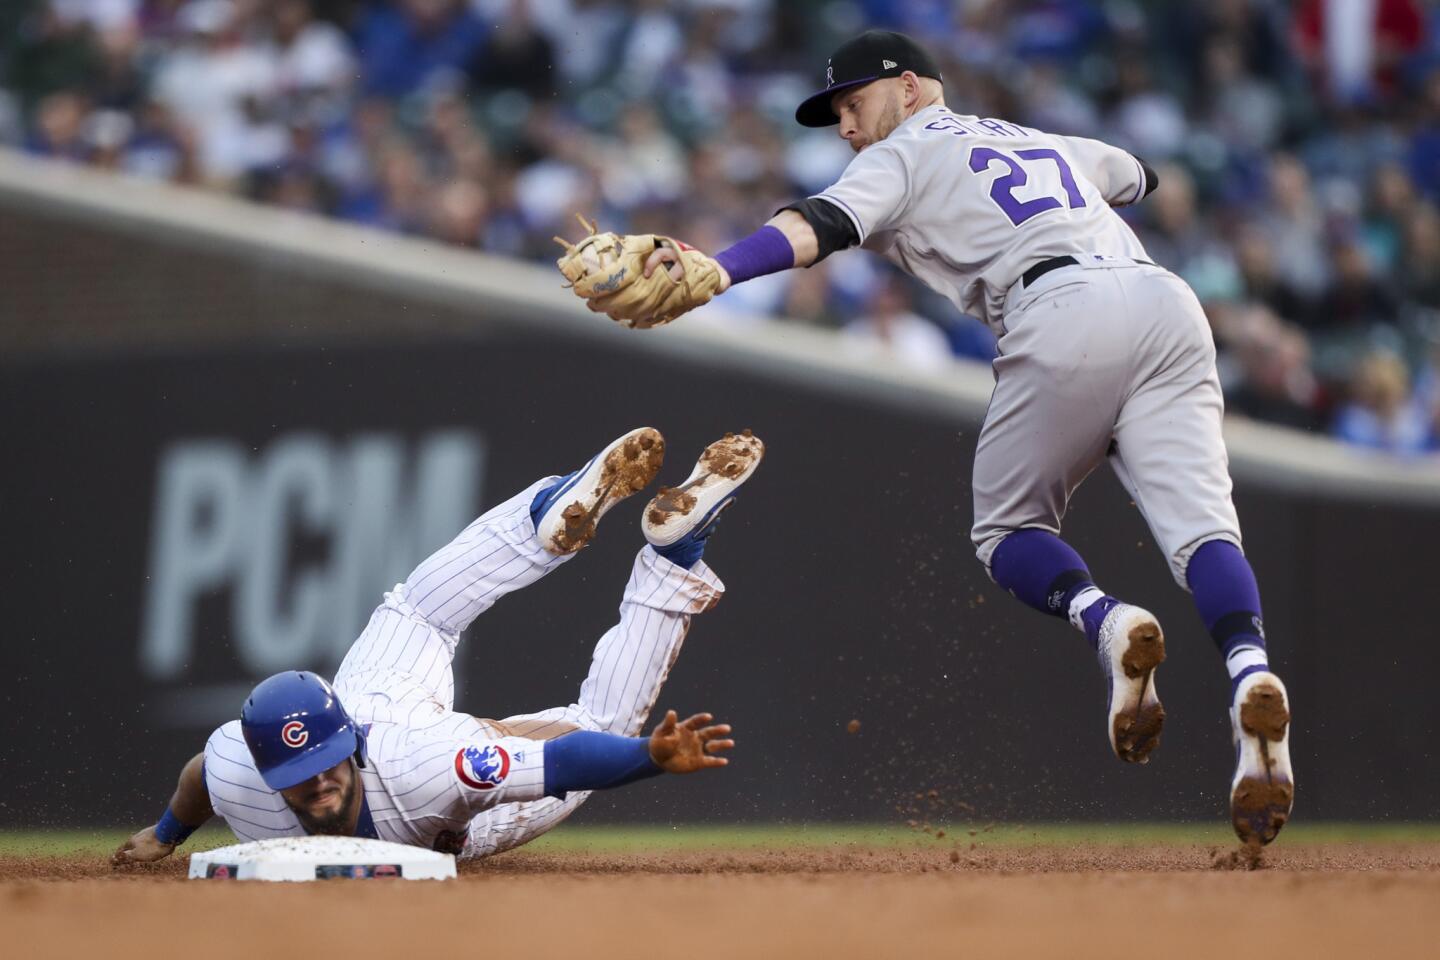 Colorado Rockies shortstop Trevor Story tags out Chicago Cubs third baseman David Bote during the third inning at Wrigley Field, June 5, 2019.